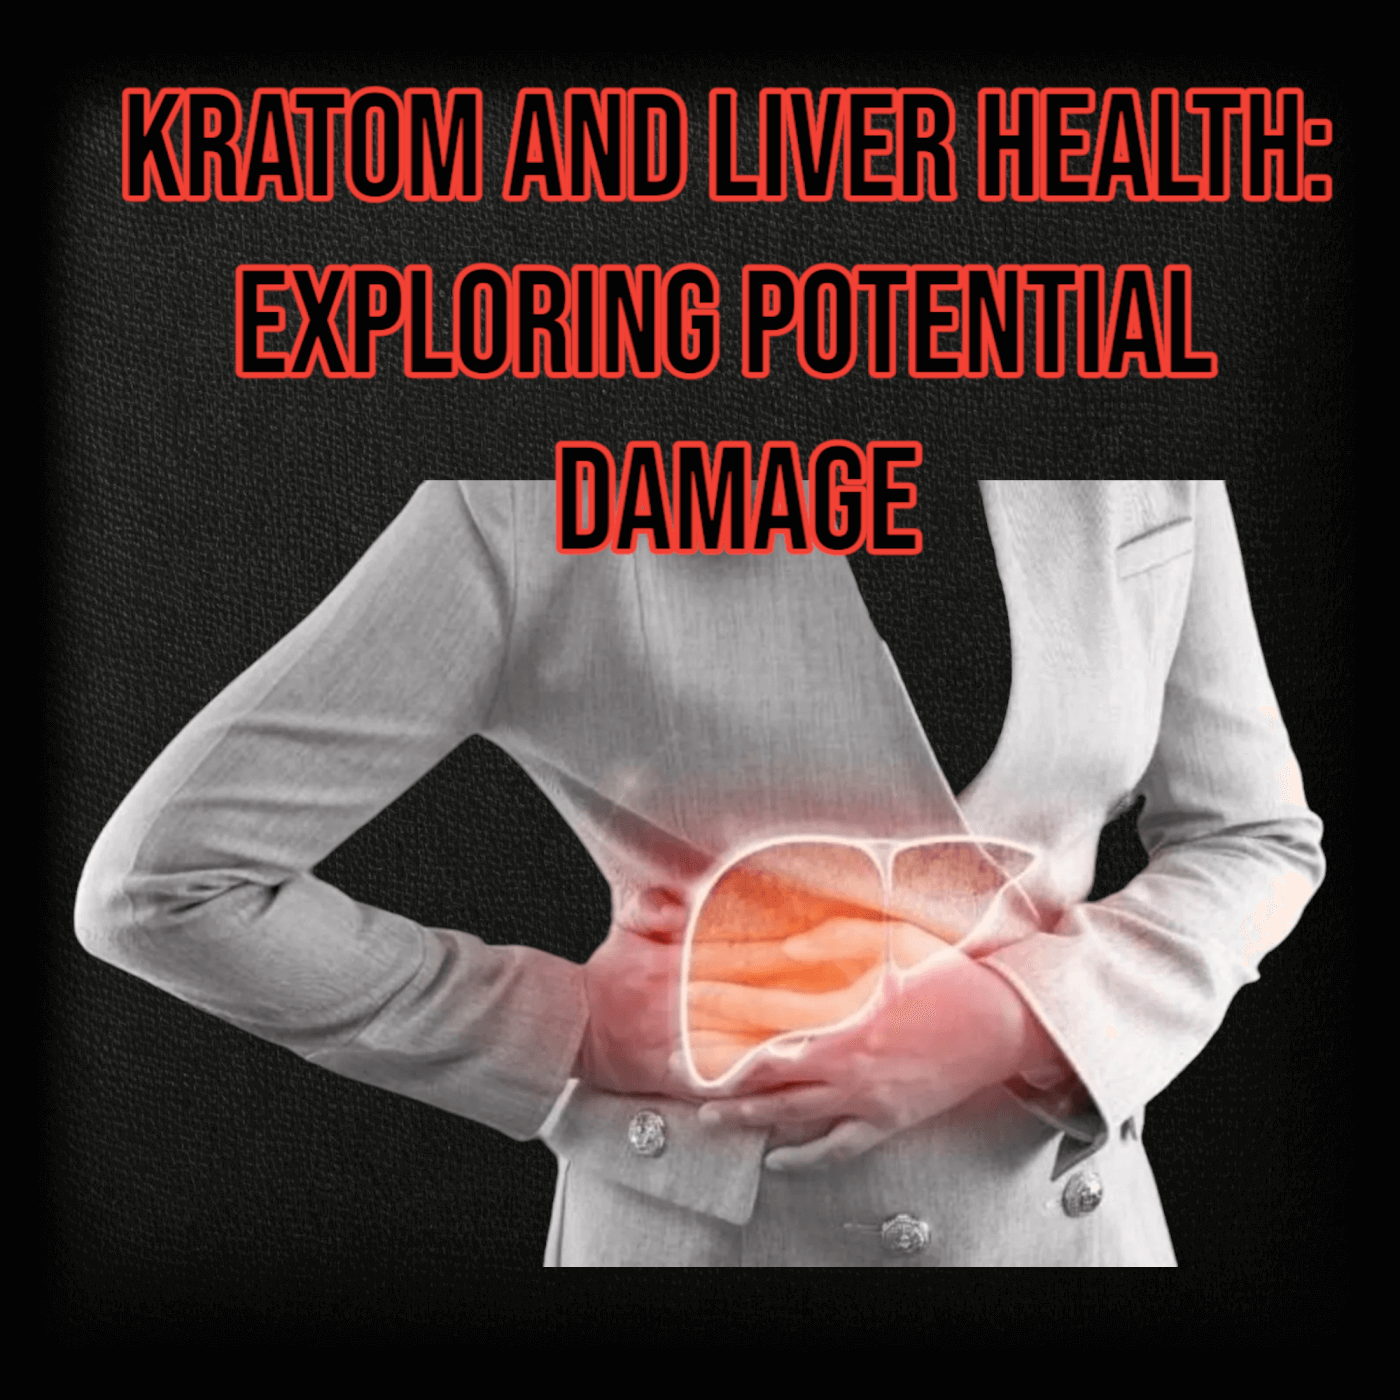 Does Kratom Cause Liver Damage? The Negotiation between Kratom and the Liver Health